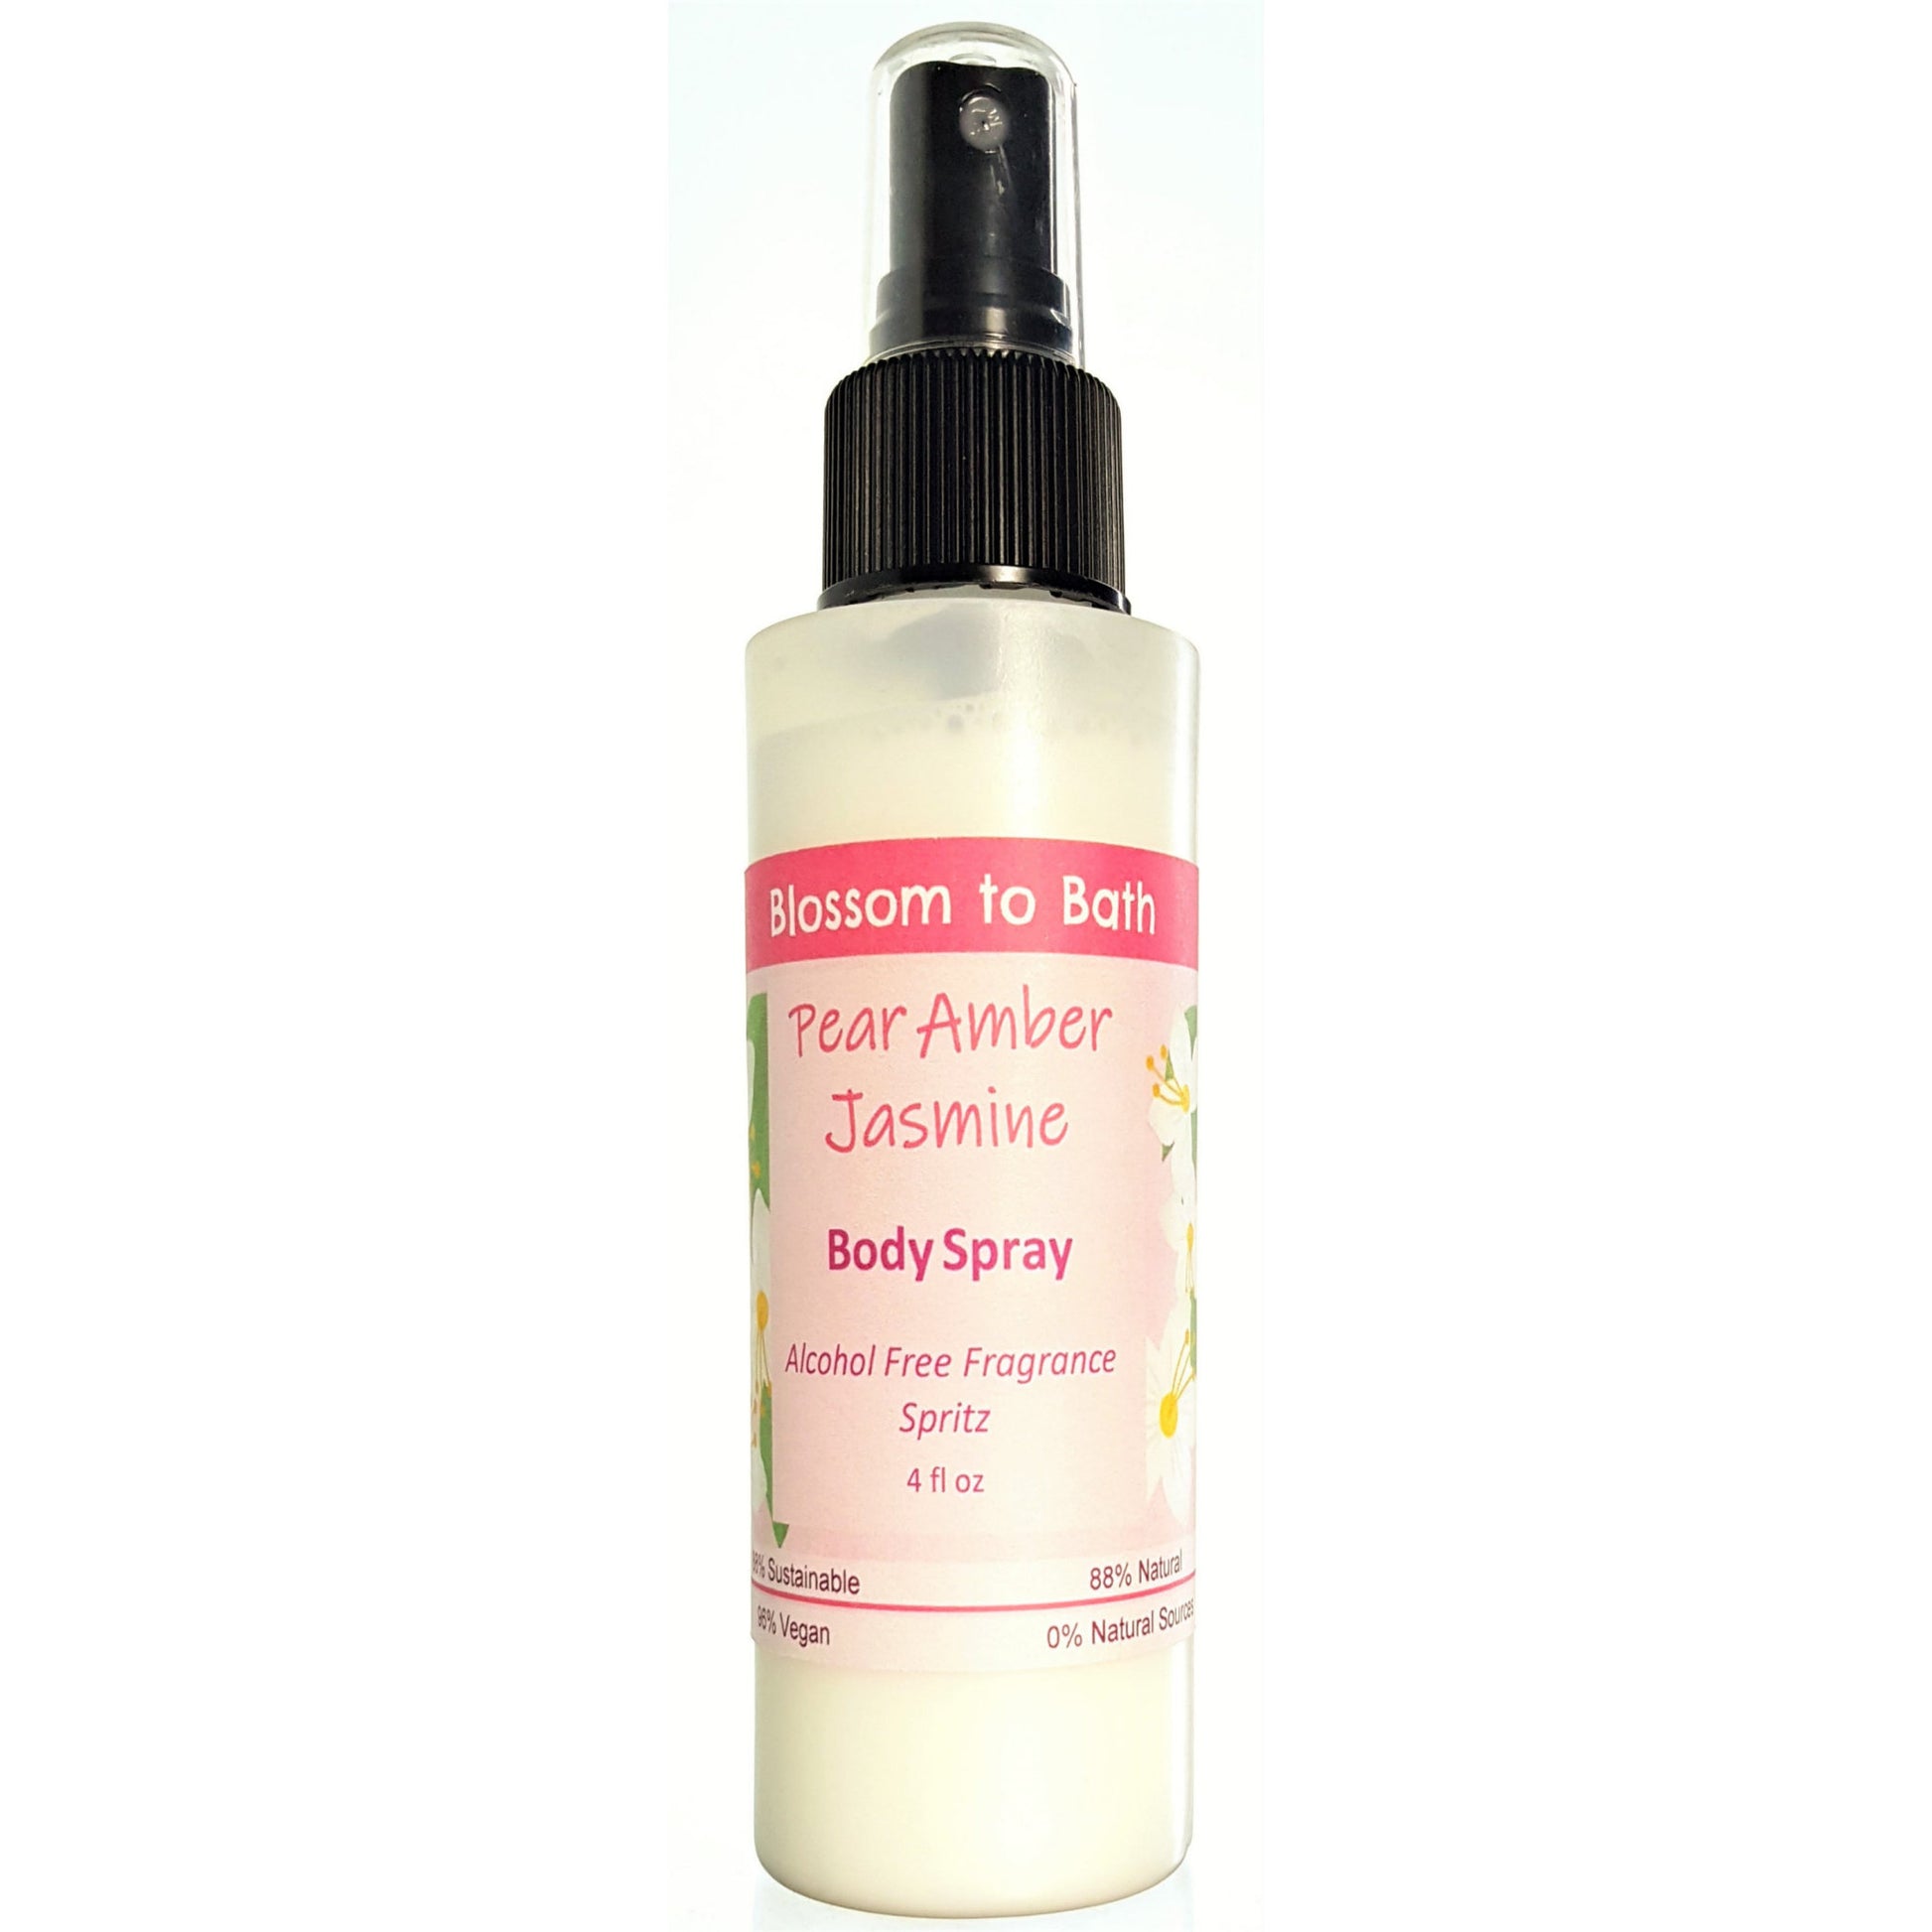 Buy Blossom to Bath Pear Amber Jasmine Body Spray from Flowersong Soap Studio.  Natural  freshening of skin, linens, or air  A scent that lets you escape to an island paradise of pear, jasmine, and warm spices.